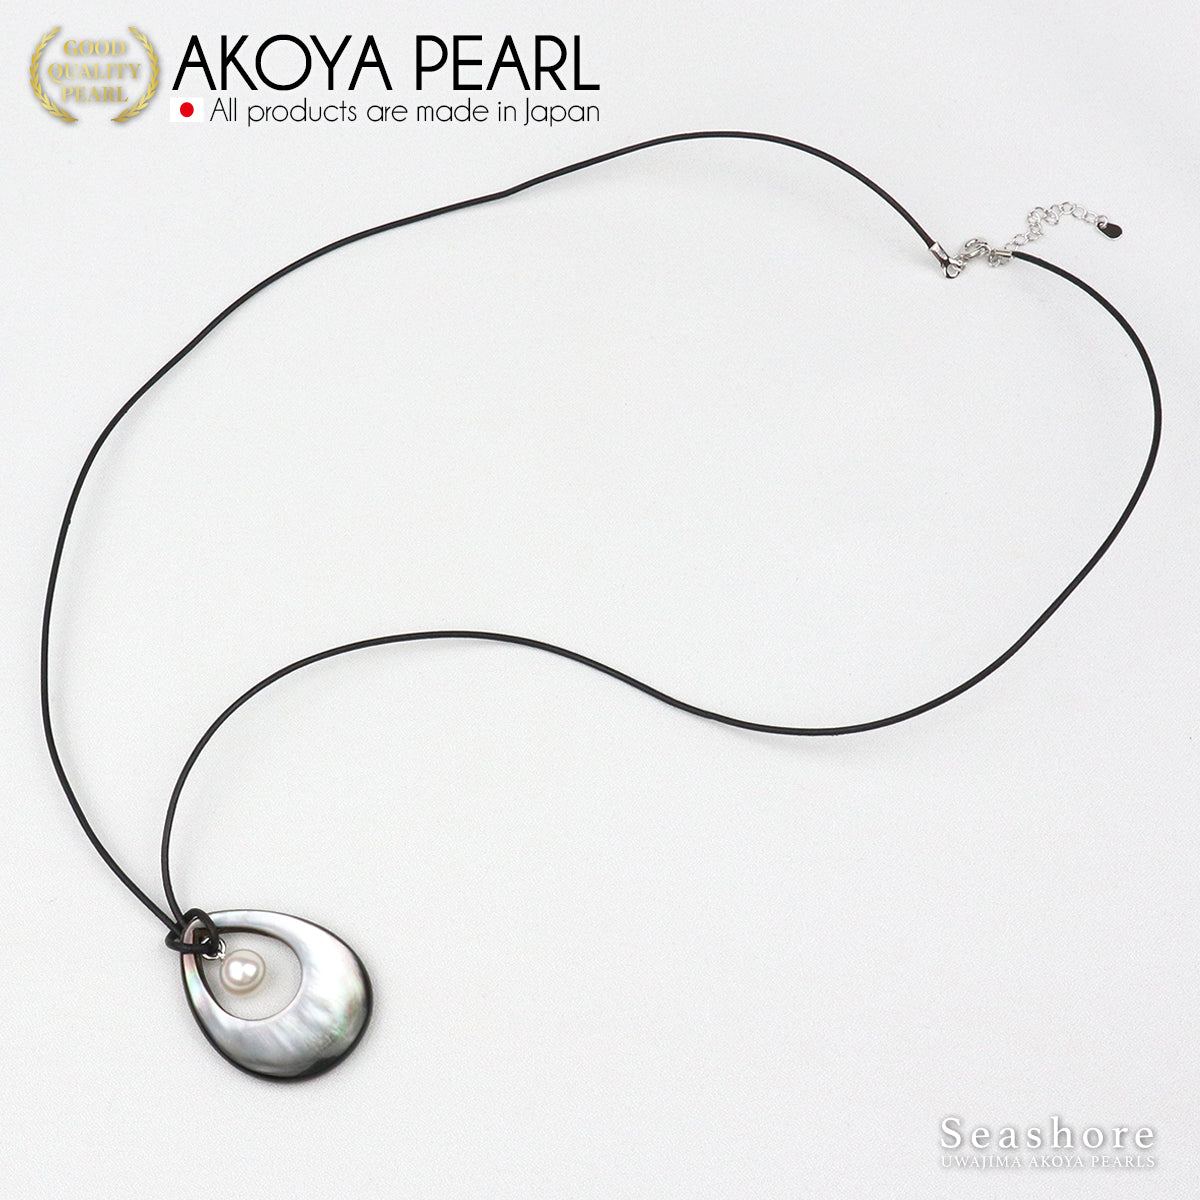 Akoya Pearl Black Pearl Shell Leather Strap Long Pendant 70-75cm [8.0-8.5mm] Genuine Leather Cord Cardboard Case Included (3839)